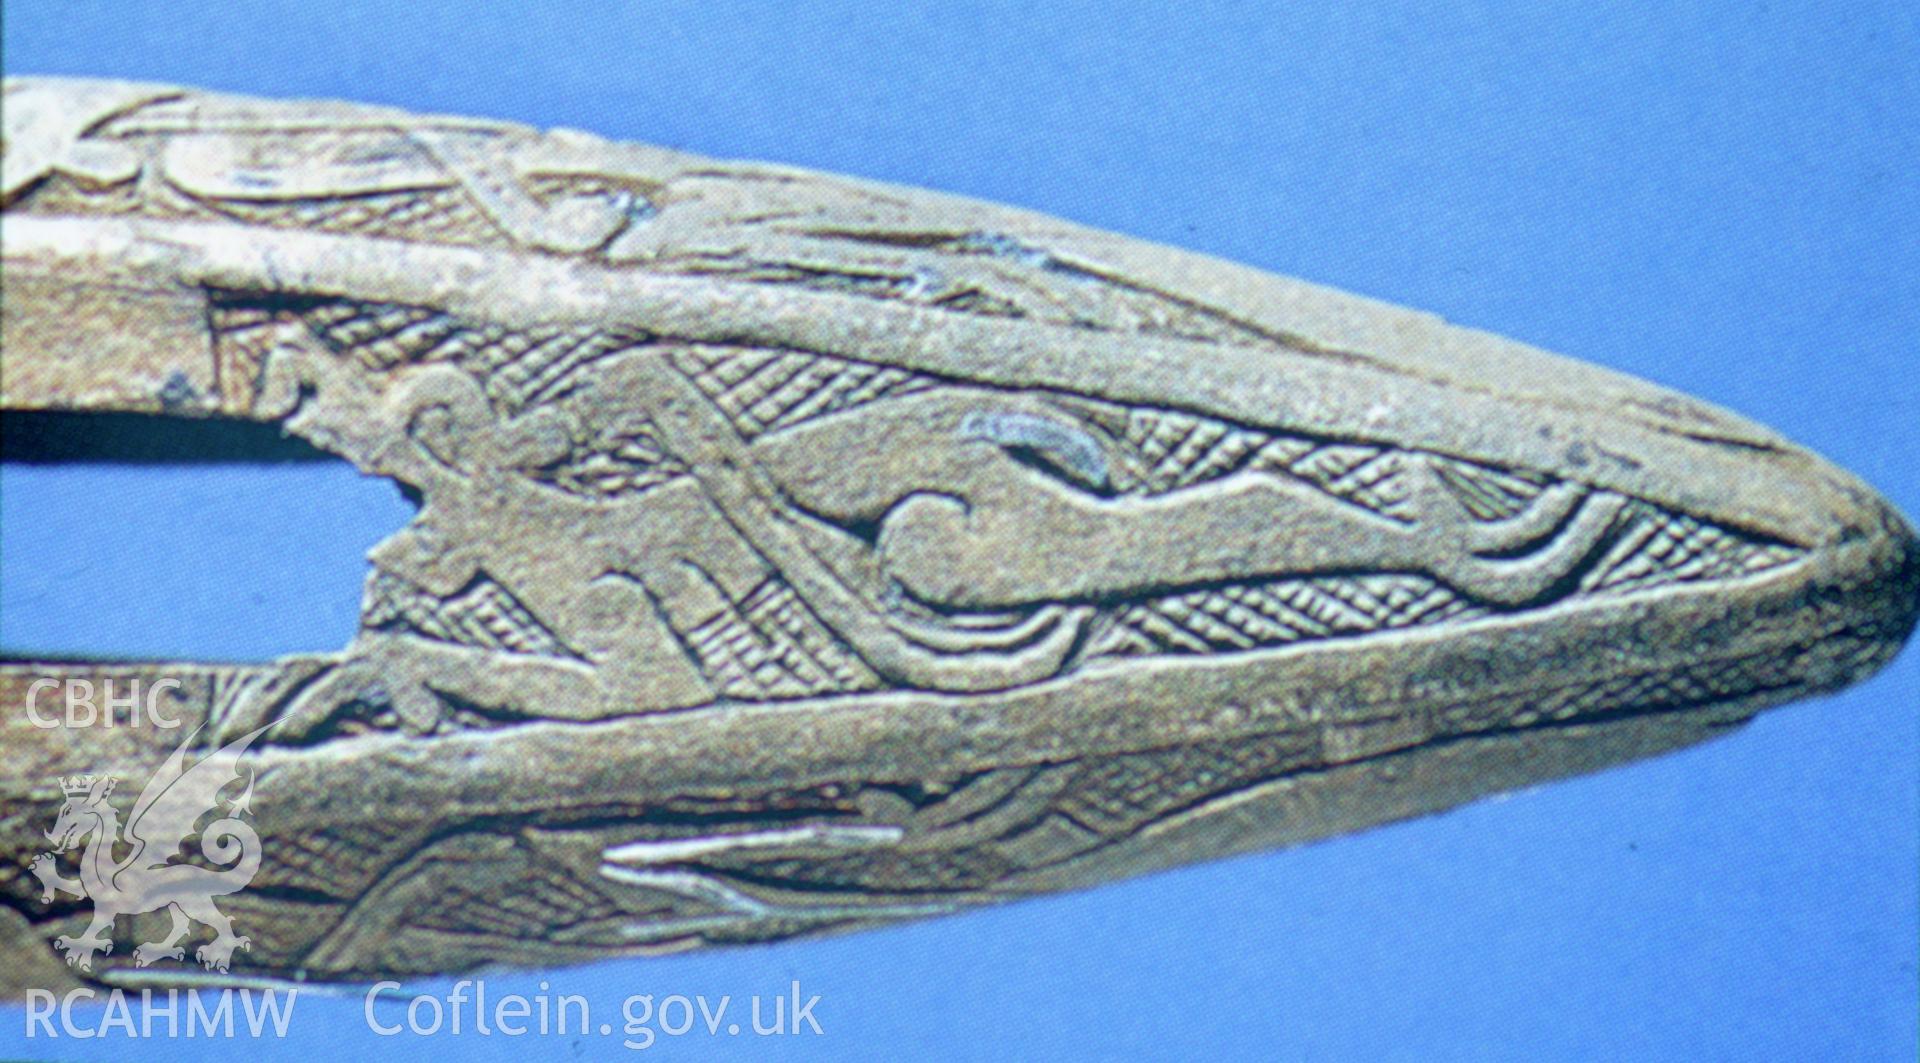 View of the Smalls Sword Hilt, revealing detail from the top face of the sword hilt showing one of the animals with open jaws in profile,  one of a set of 22 colour slides from a survey of the Smalls designated shipwreck area, carried out by the Archaeological Diving Unit. Courtesy National Museum of Wales